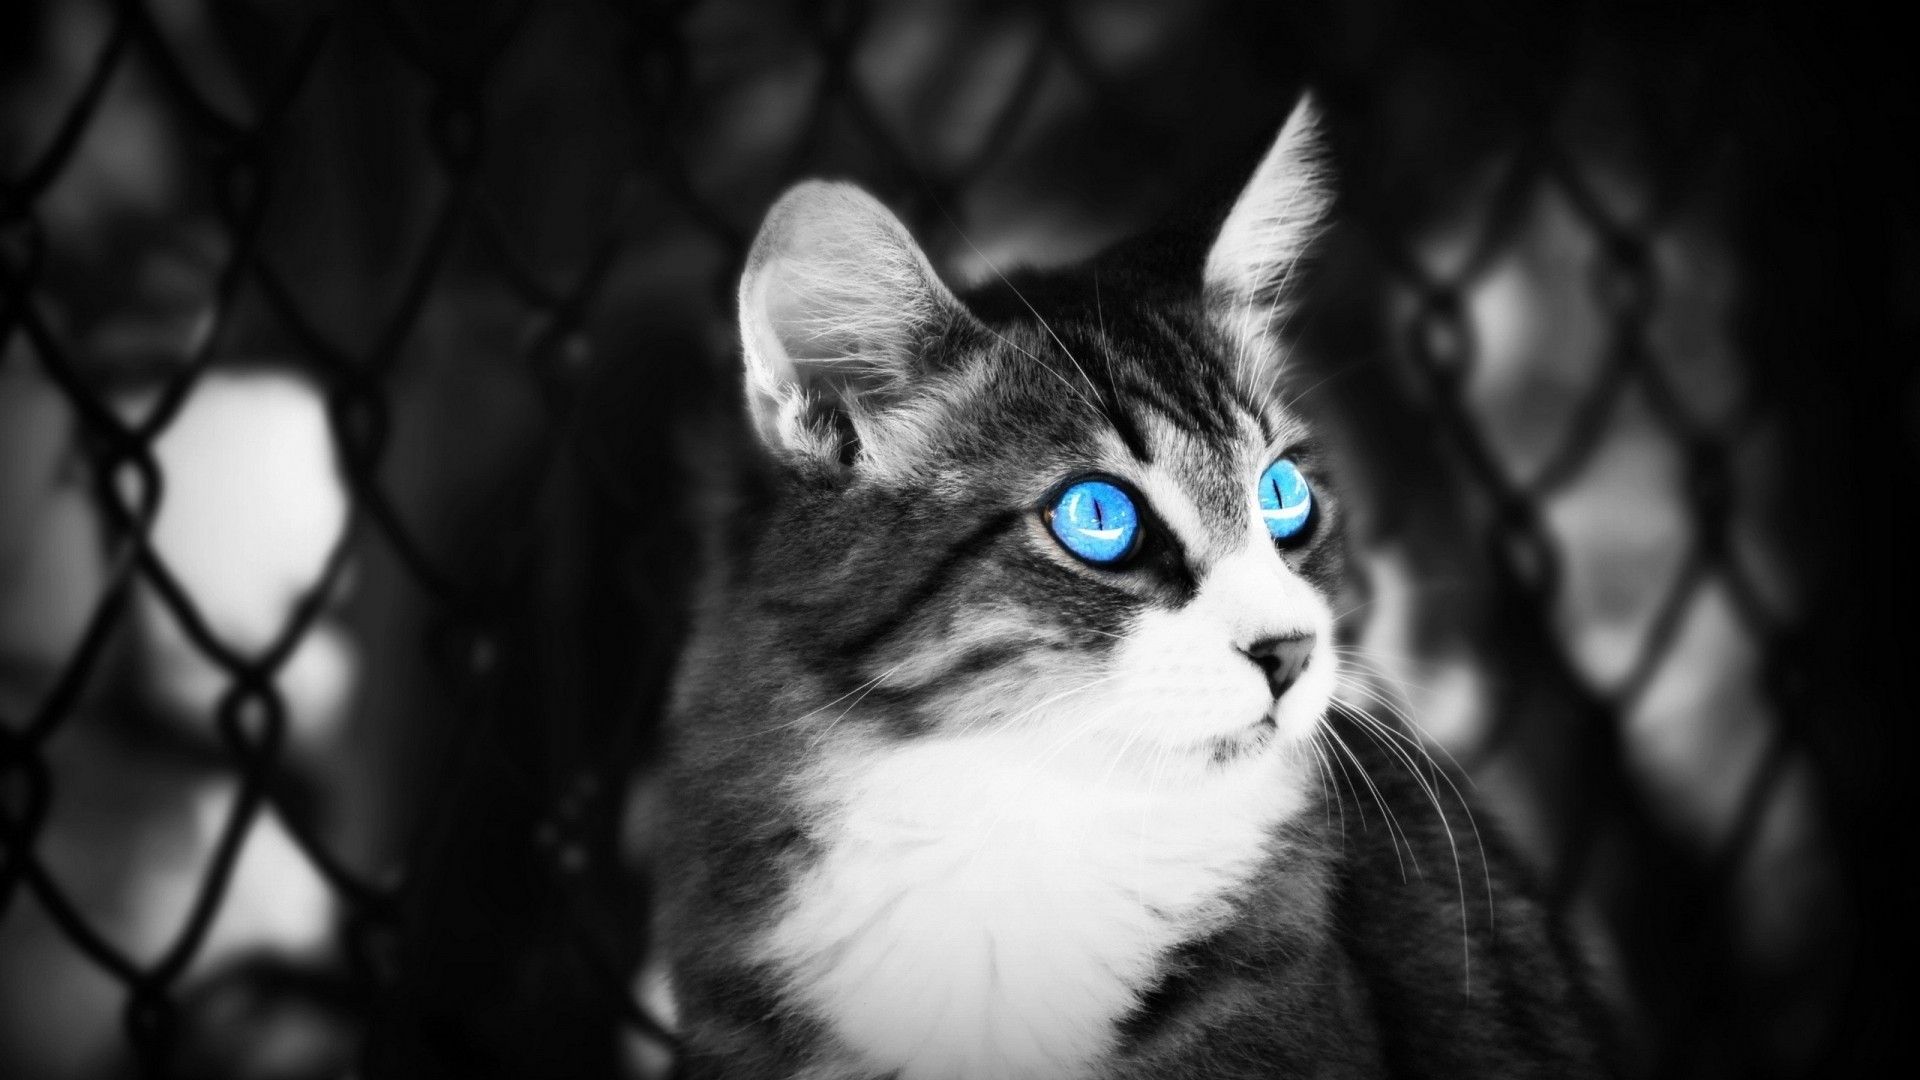 Black-and-white-cat-wallpaper-3578-3771-hd-wallpapers.jpg 1920x1080